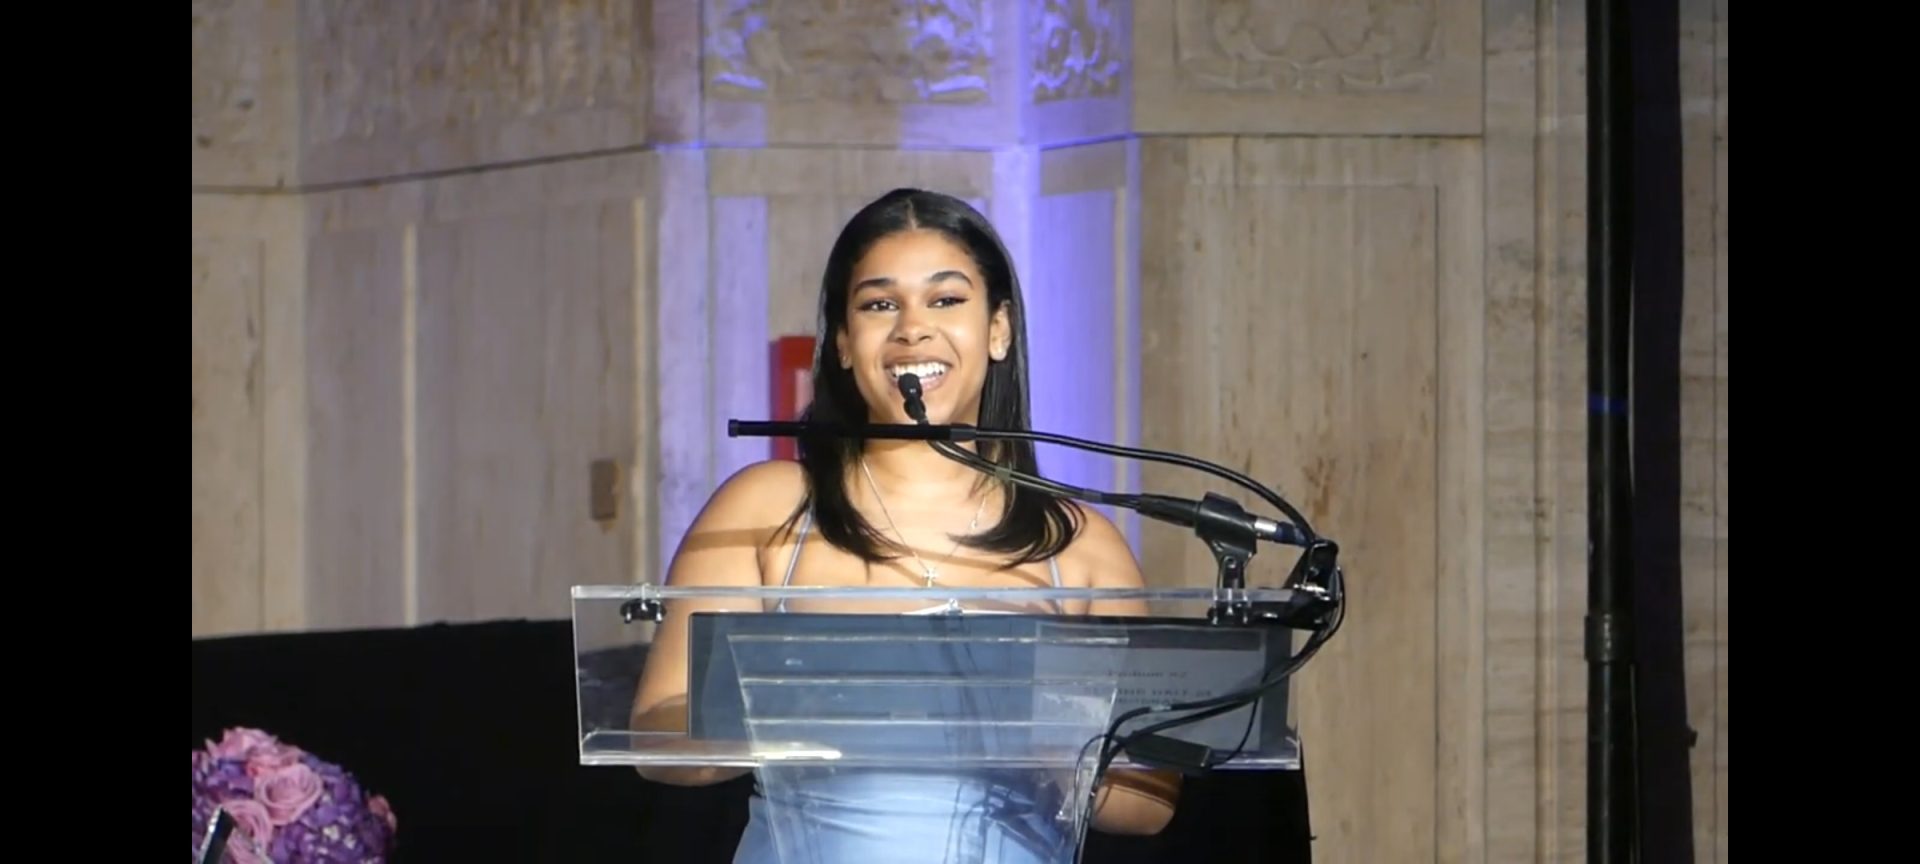 Aisha Beltran accepts the Carrie Terrell Youth Achiever Award. (Photo by Derrel Jazz Johnson for rolling out.)